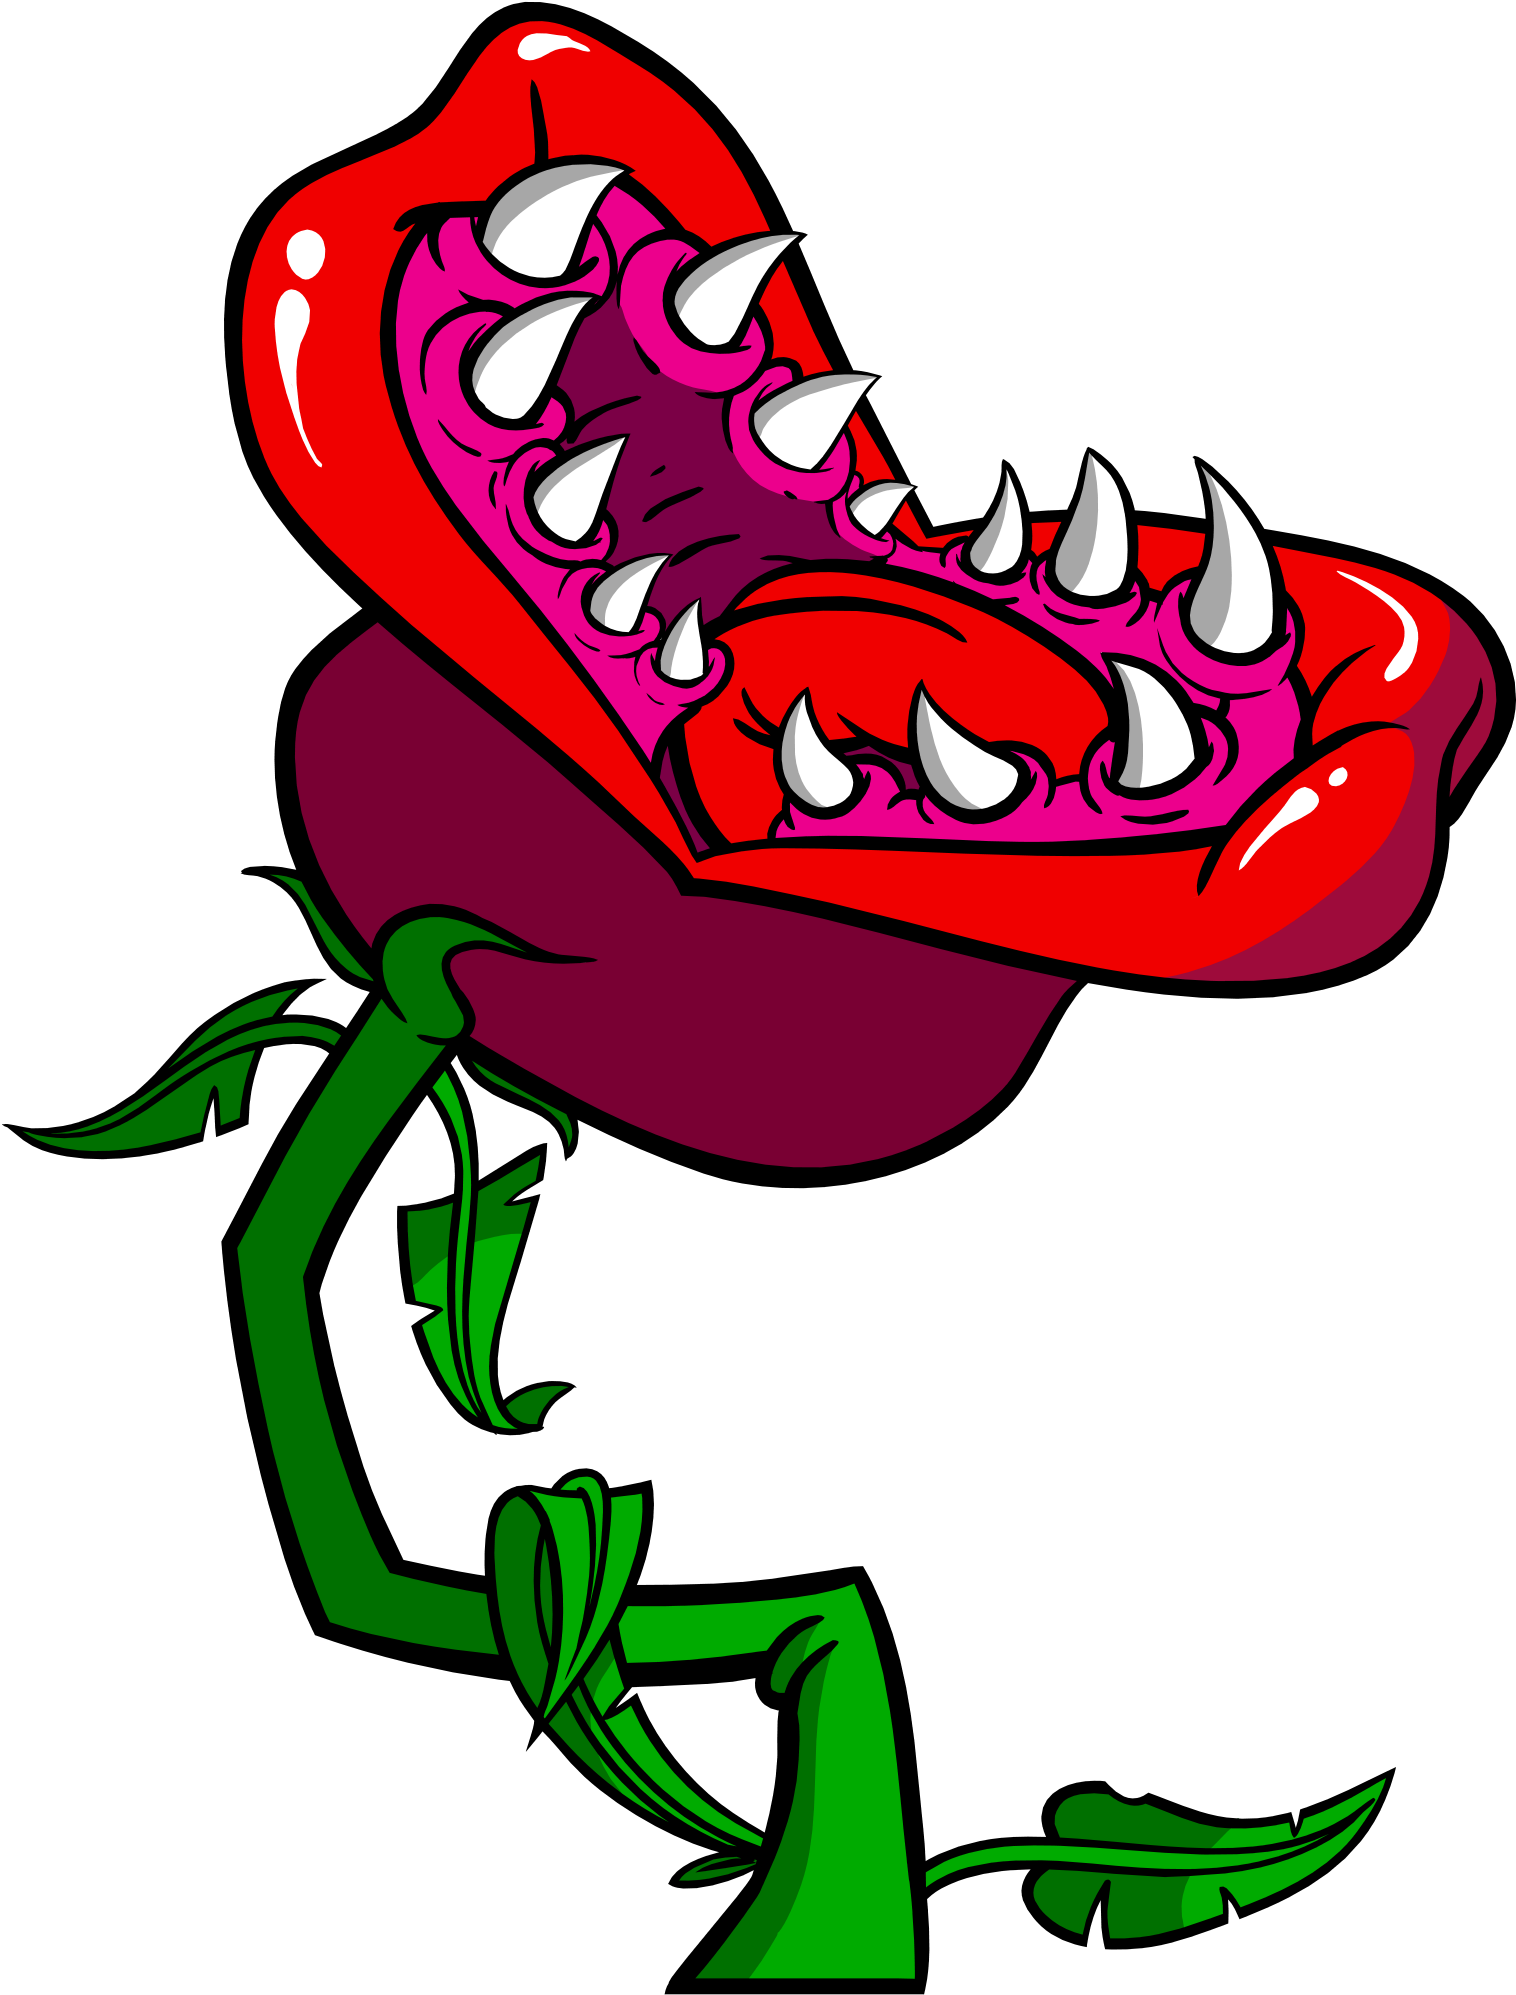 Ducktales - Remastered - Plant Red - Open Mouth - Ducktales - Remastered - Plant Red - Open Mouth (2048x2048)